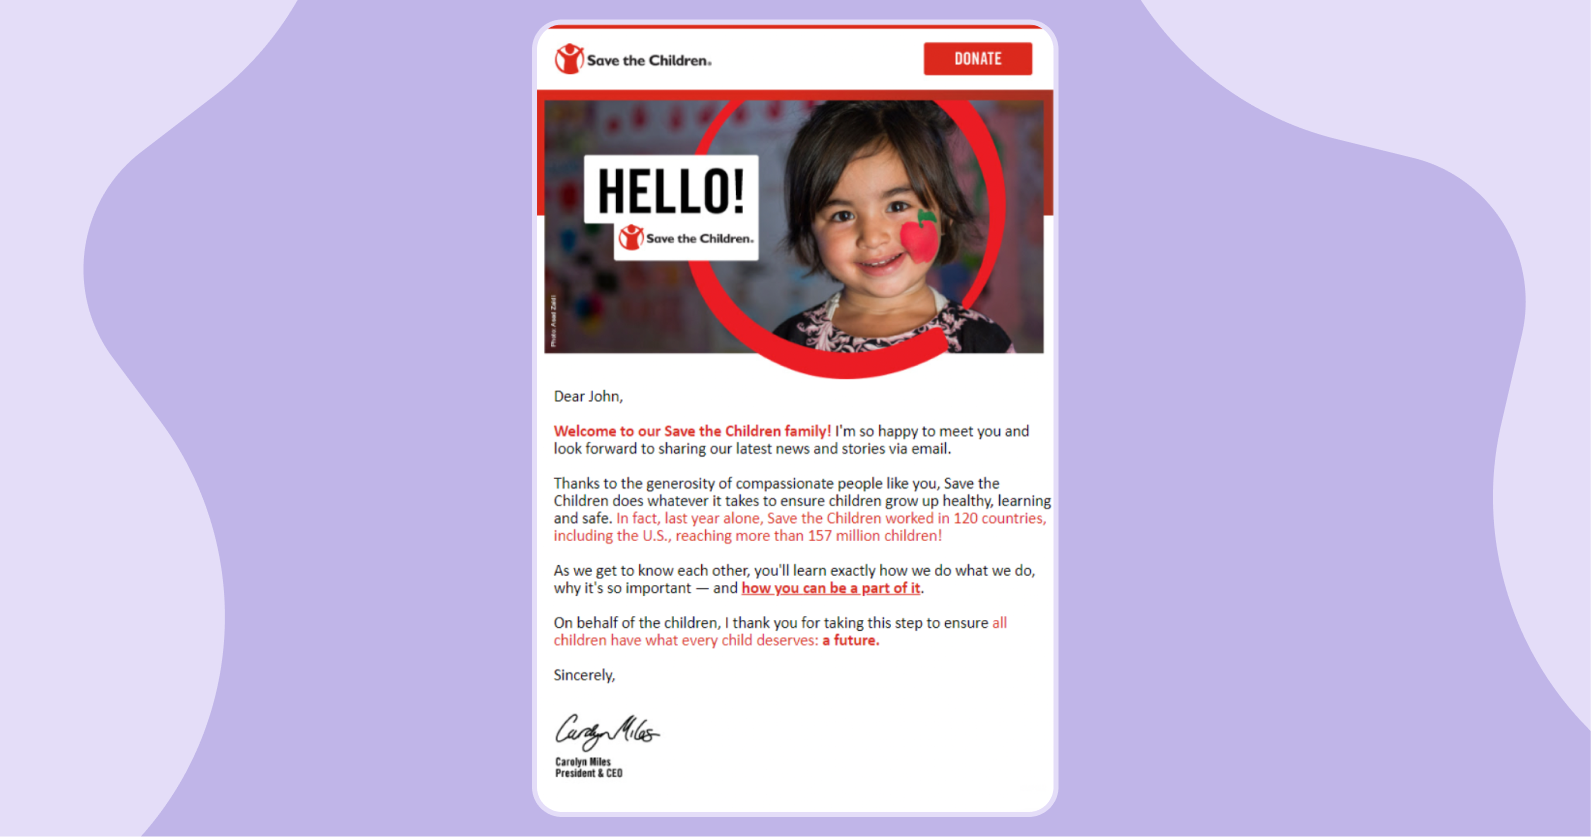 Example of a personalised emailed from charity, Save the Children.